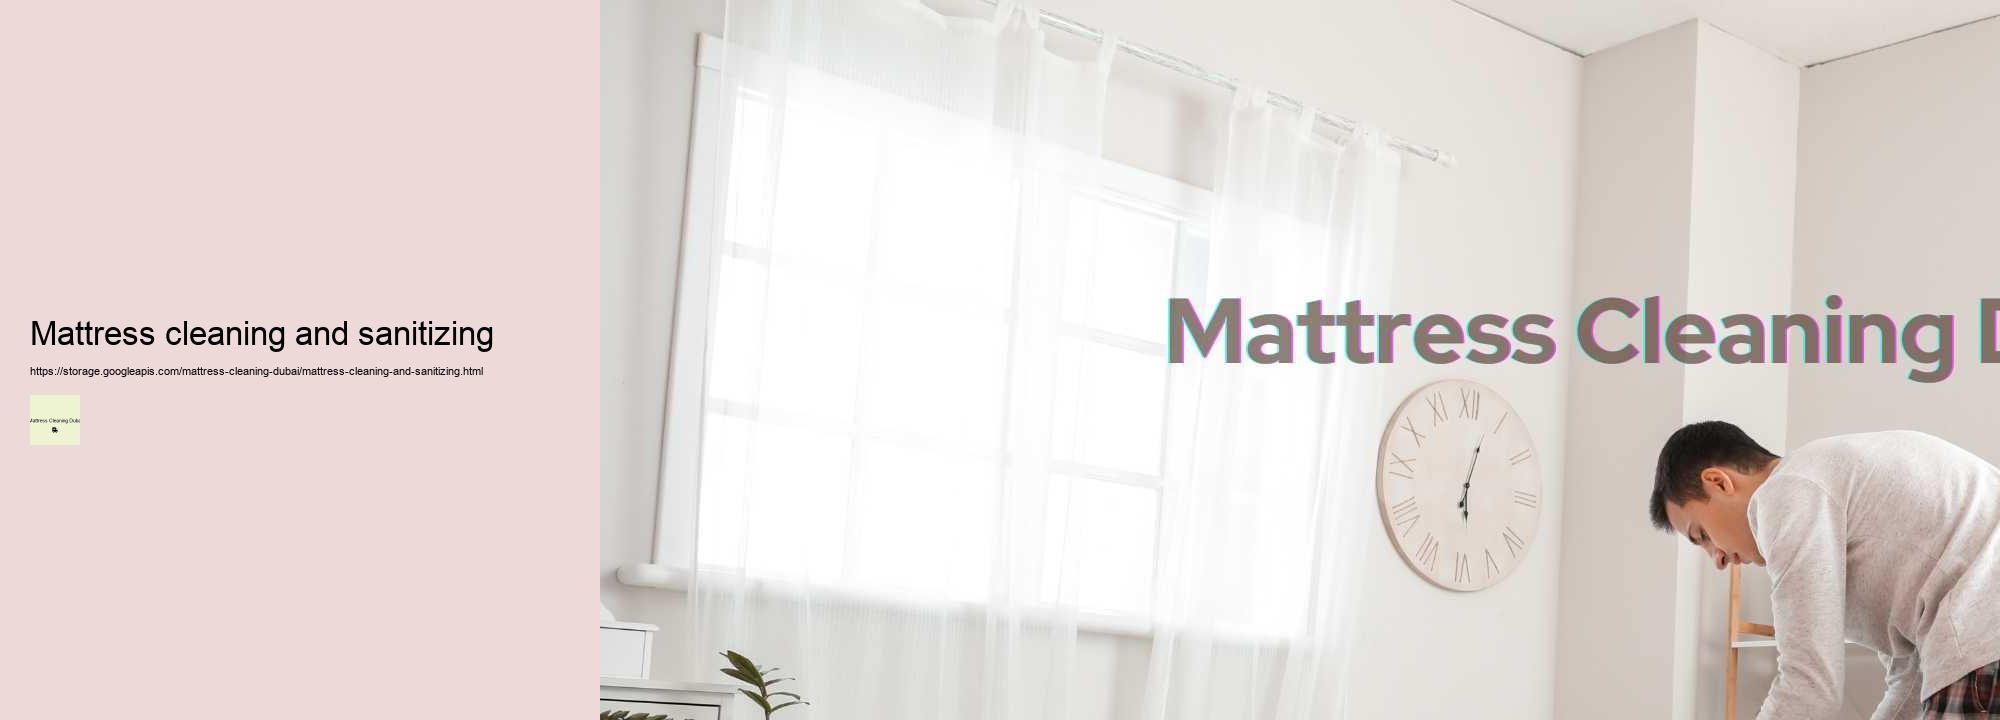 Mattress cleaning and sanitizing